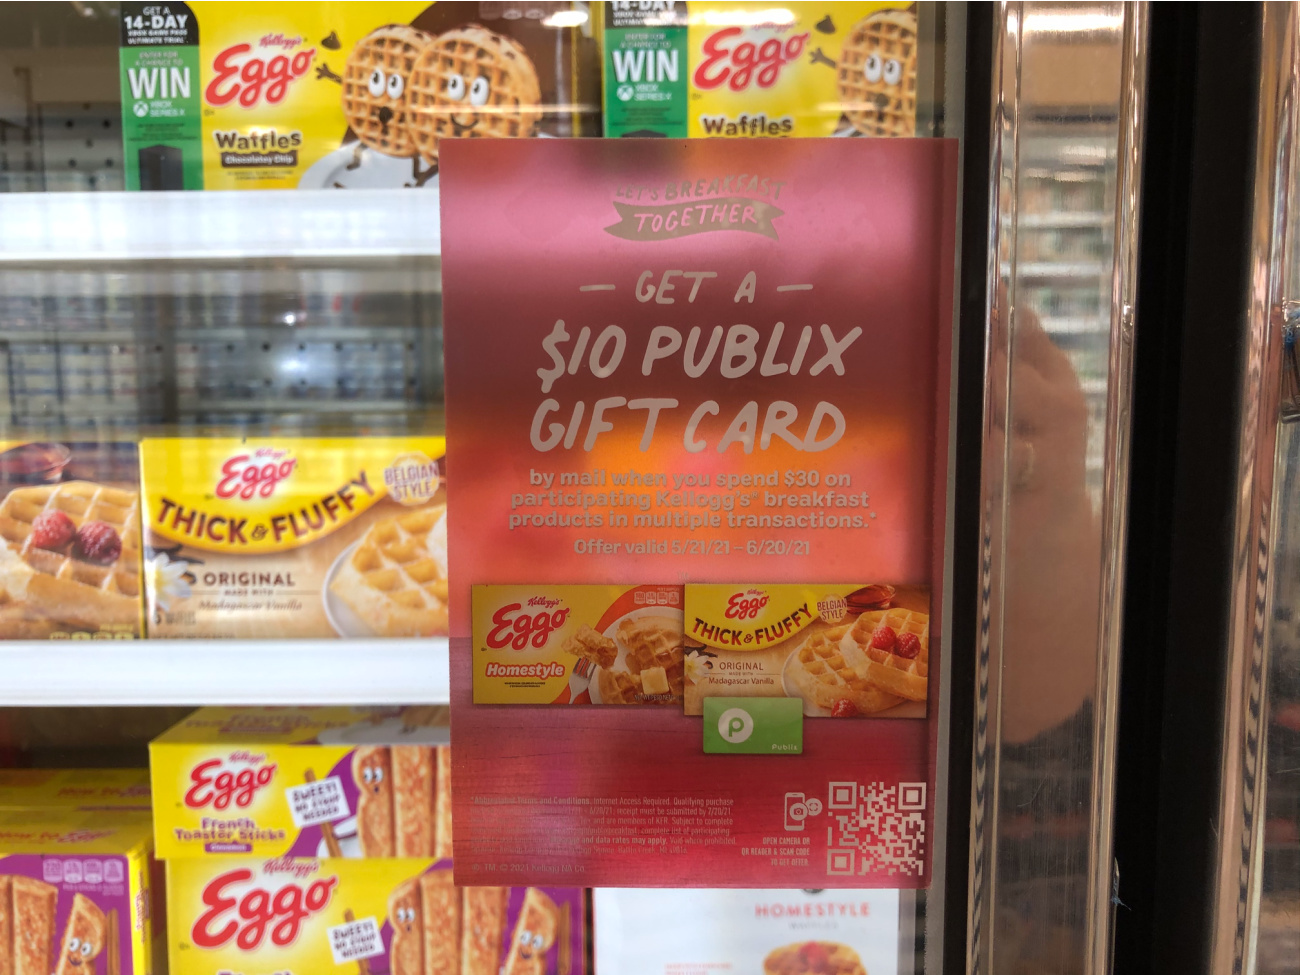 Let's Breakfast Together With Kellogg's® And Earn A $10 Publix Gift Card! on I Heart Publix